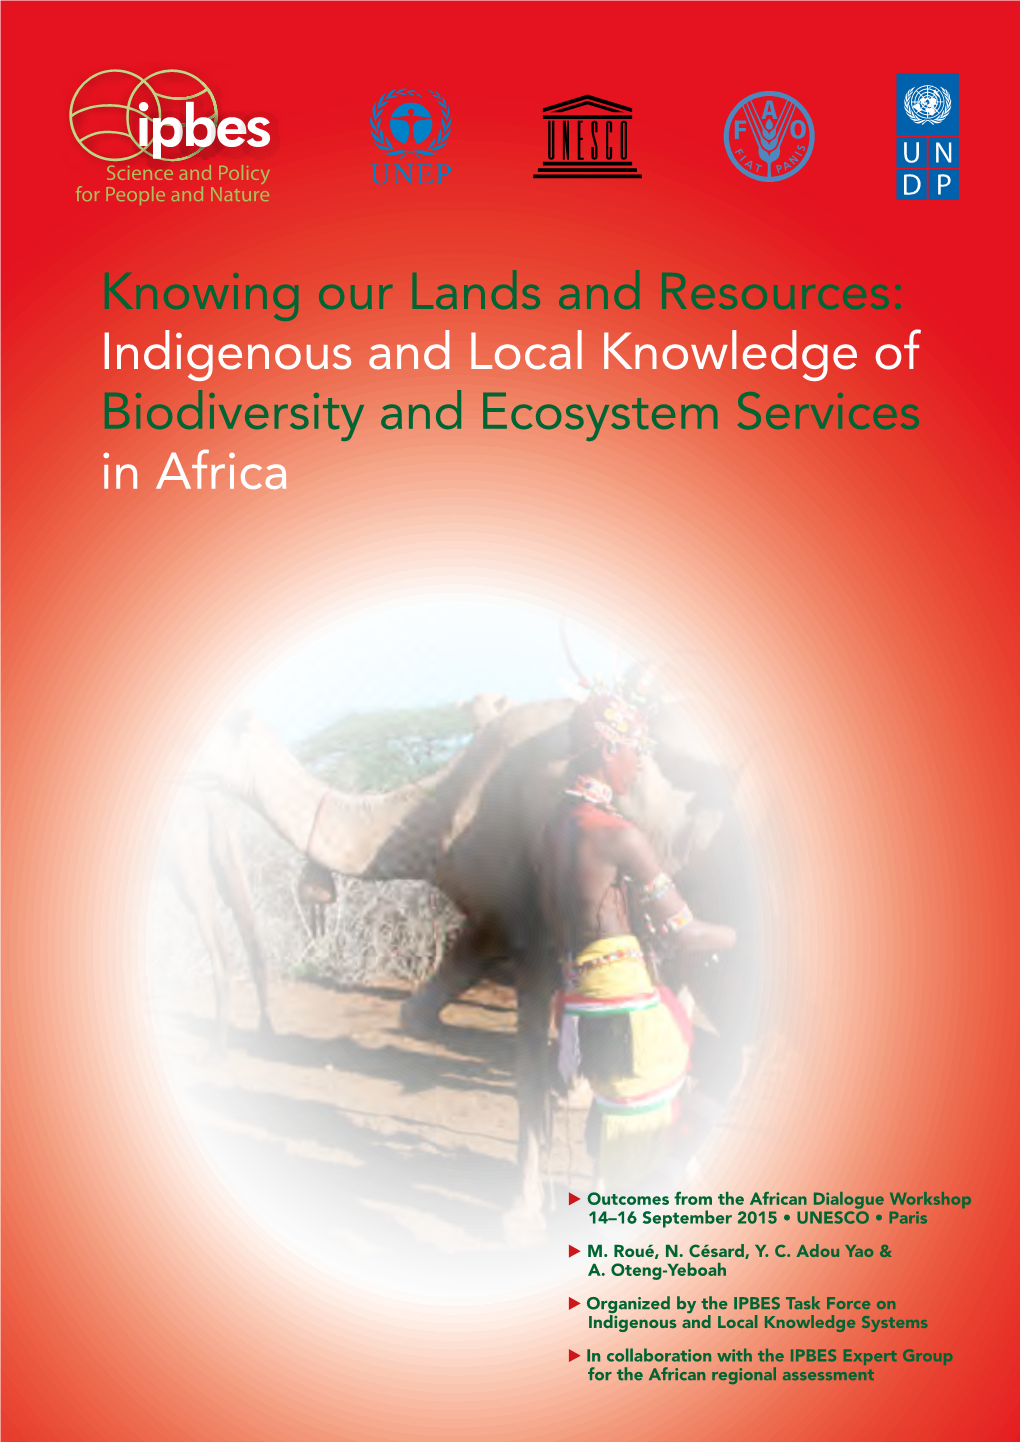 Knowing Our Lands and Resources: Indigenous and Local Knowledge of Biodiversity and Ecosystem Services in Africa